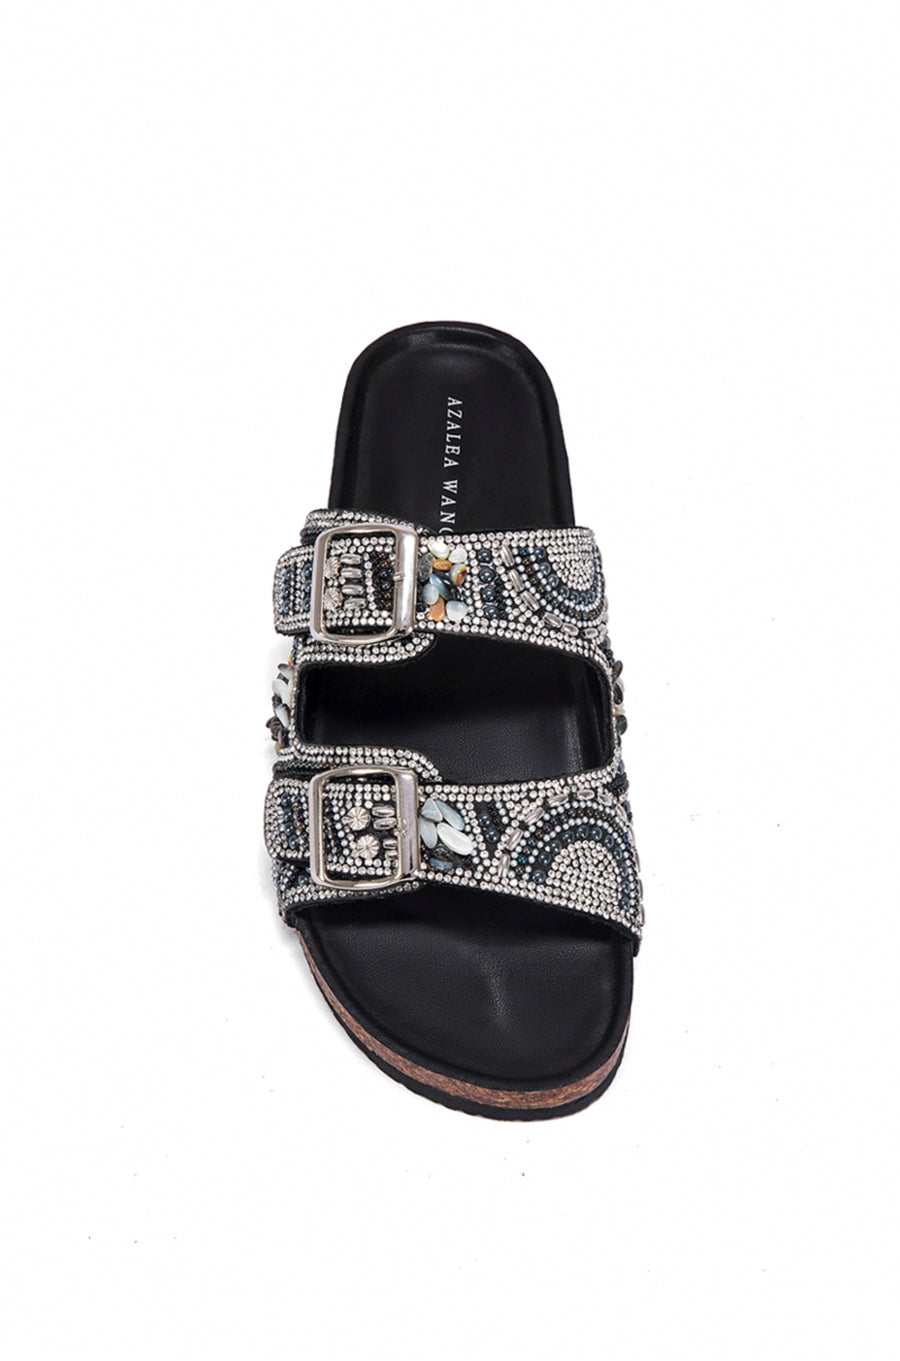 black open toe flat sandal with beaded and embellished double straps